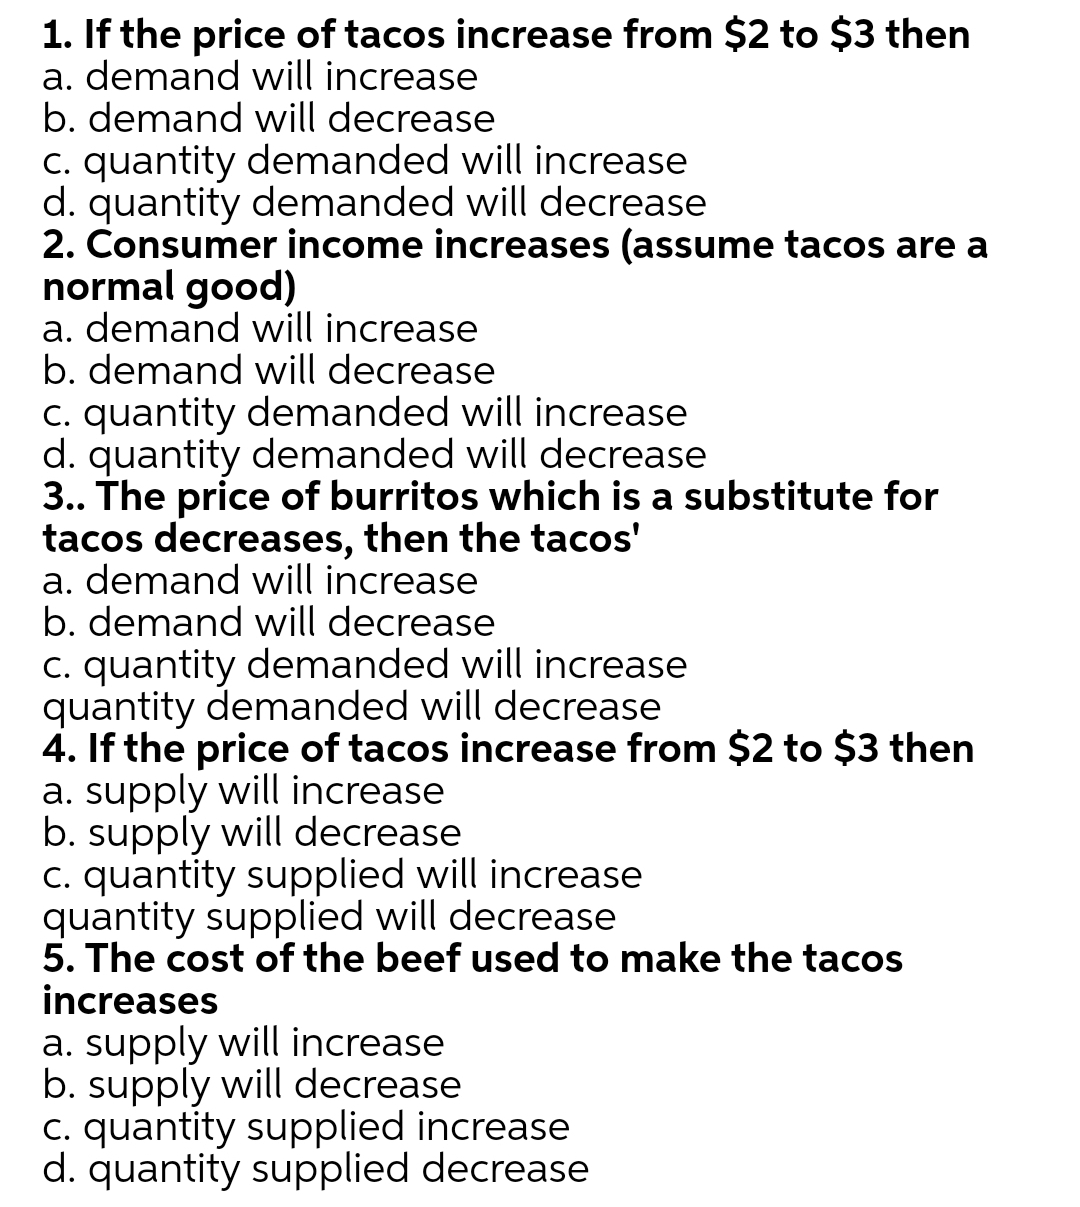 1. If the price of tacos increase from $2 to $3 then
a. demand will increase
b. demand will decrease
c. quantity demanded will increase
d. quantity demanded will decrease
2. Consumer income increases (assume tacos are a
normal good)
a. demand will increase
b. demand will decrease
C. quantity demanded will increase
d. quantity demanded will decrease
3.. The price of burritos which is a substitute for
tacos decreases, then the tacos'
a. demand will increase
b. demand will decrease
C. quantity demanded will increase
quantity demanded will decrease
4. If the price of tacos increase from $2 to $3 then
a. supply will increase
b. supply will decrease
c. quantity supplied will increase
quantity supplied will decrease
5. The cost of the beef used to make the tacos
increases
a. supply will increase
b. supply will decrease
c. quantity supplied increase
d. quantity supplied decrease
